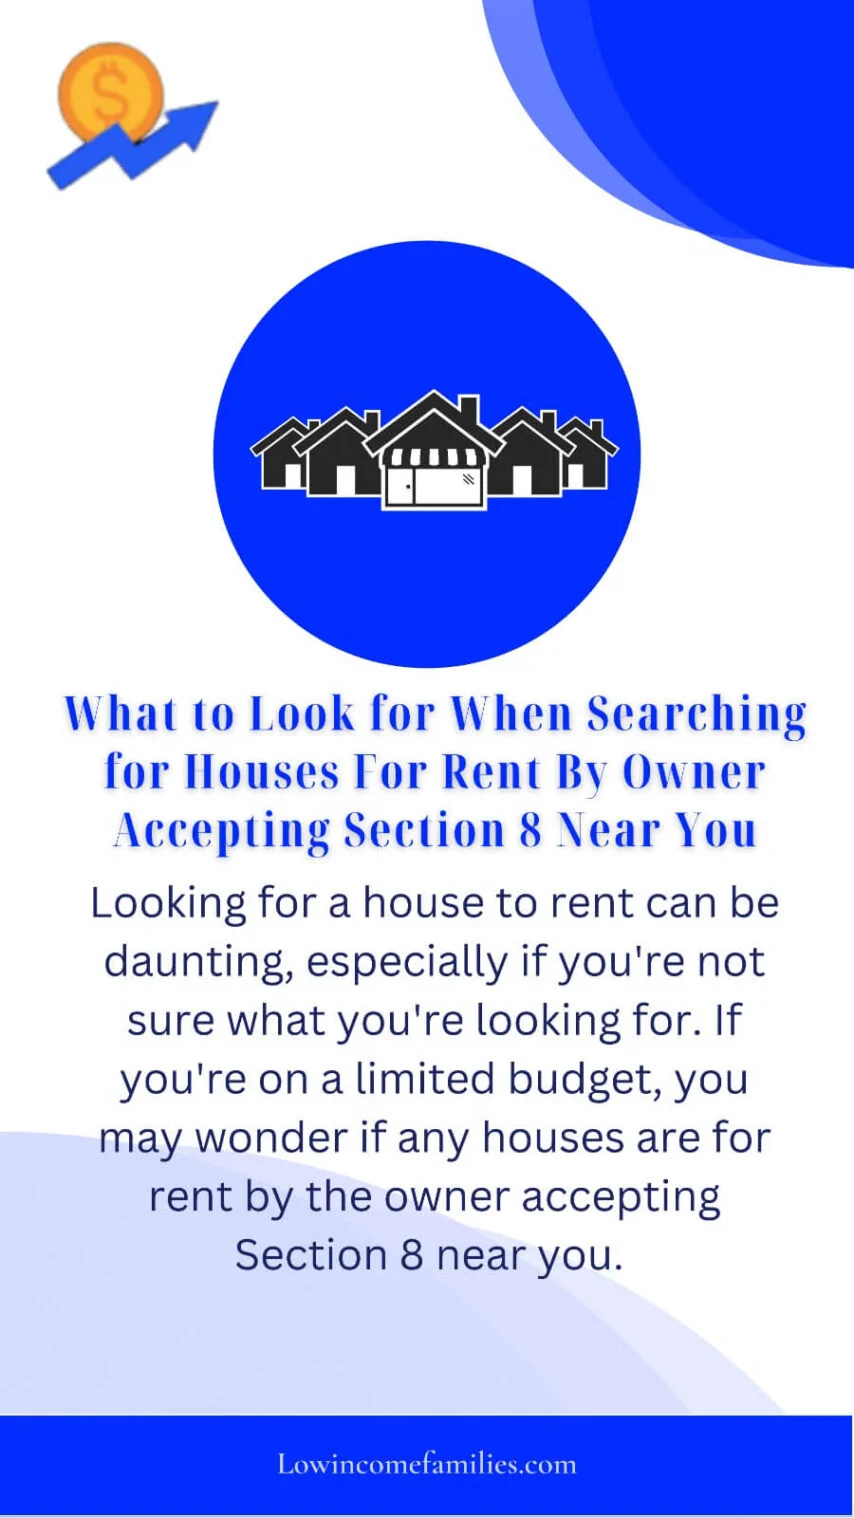 Houses For Rent Accepting Section 8 Vouchers 